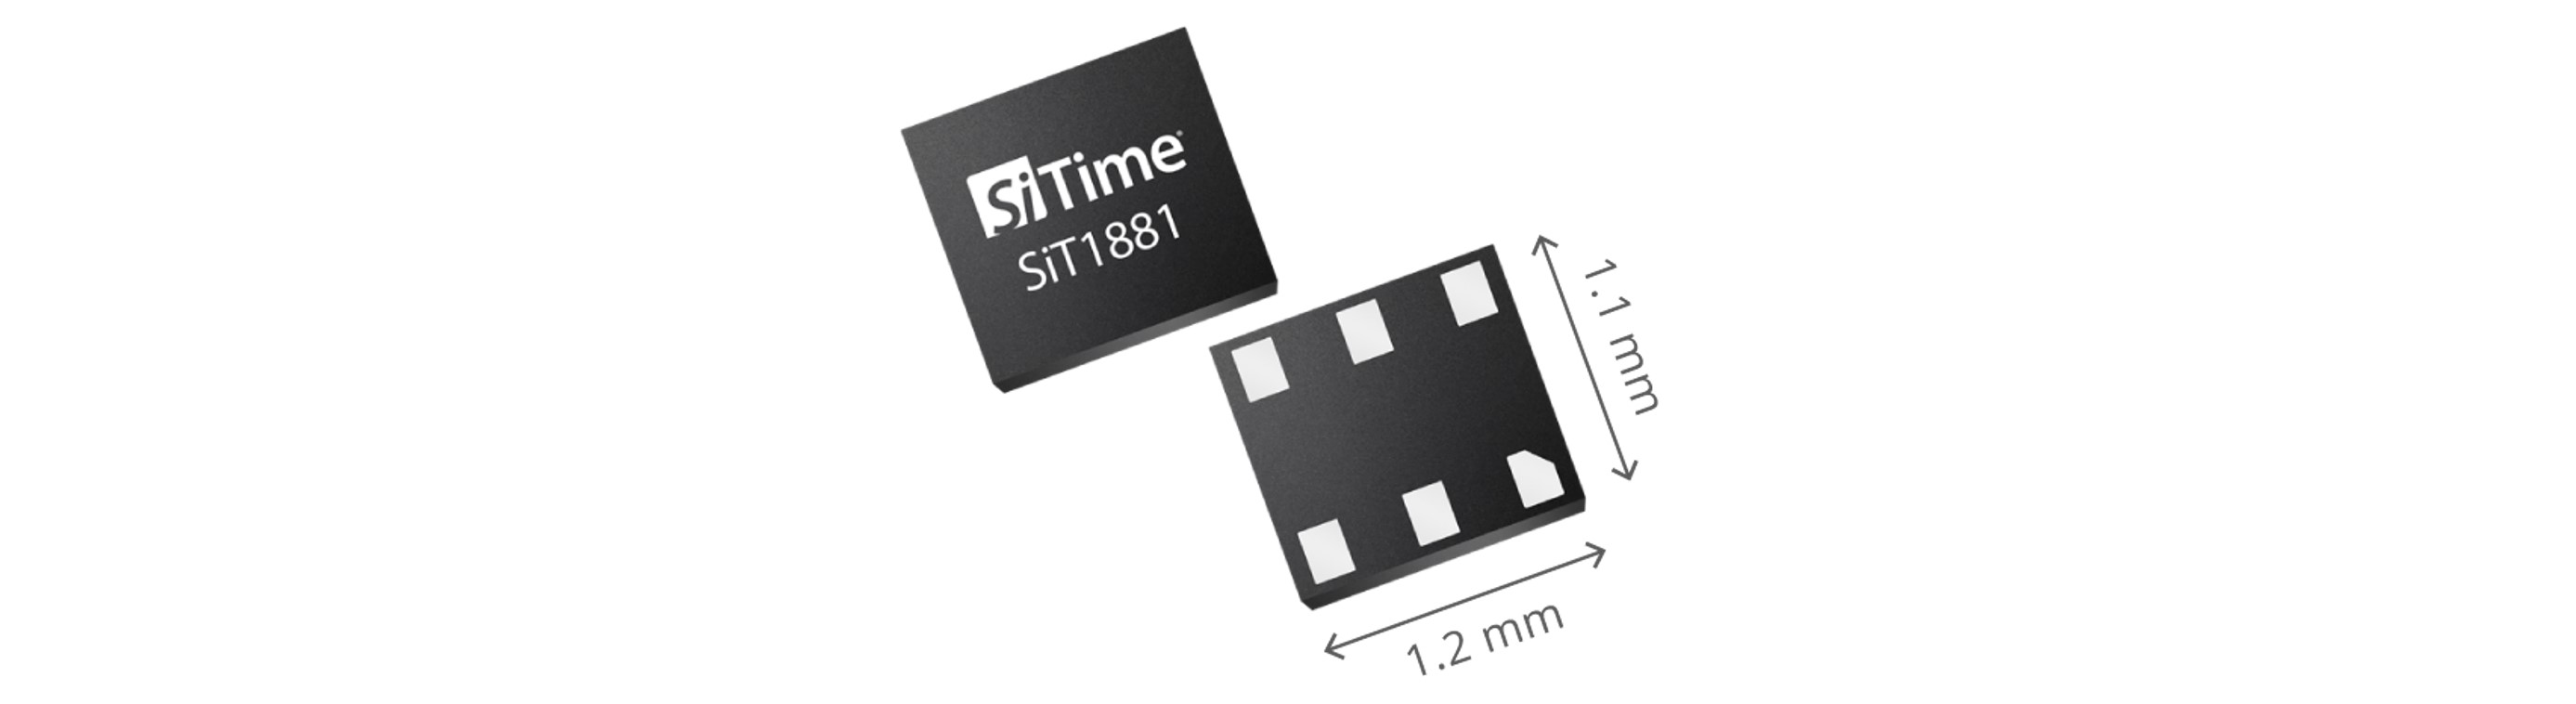 SiTime-SiT1881-kHz-oscillator-package with dimensions of 1.2 by 1.1 mm